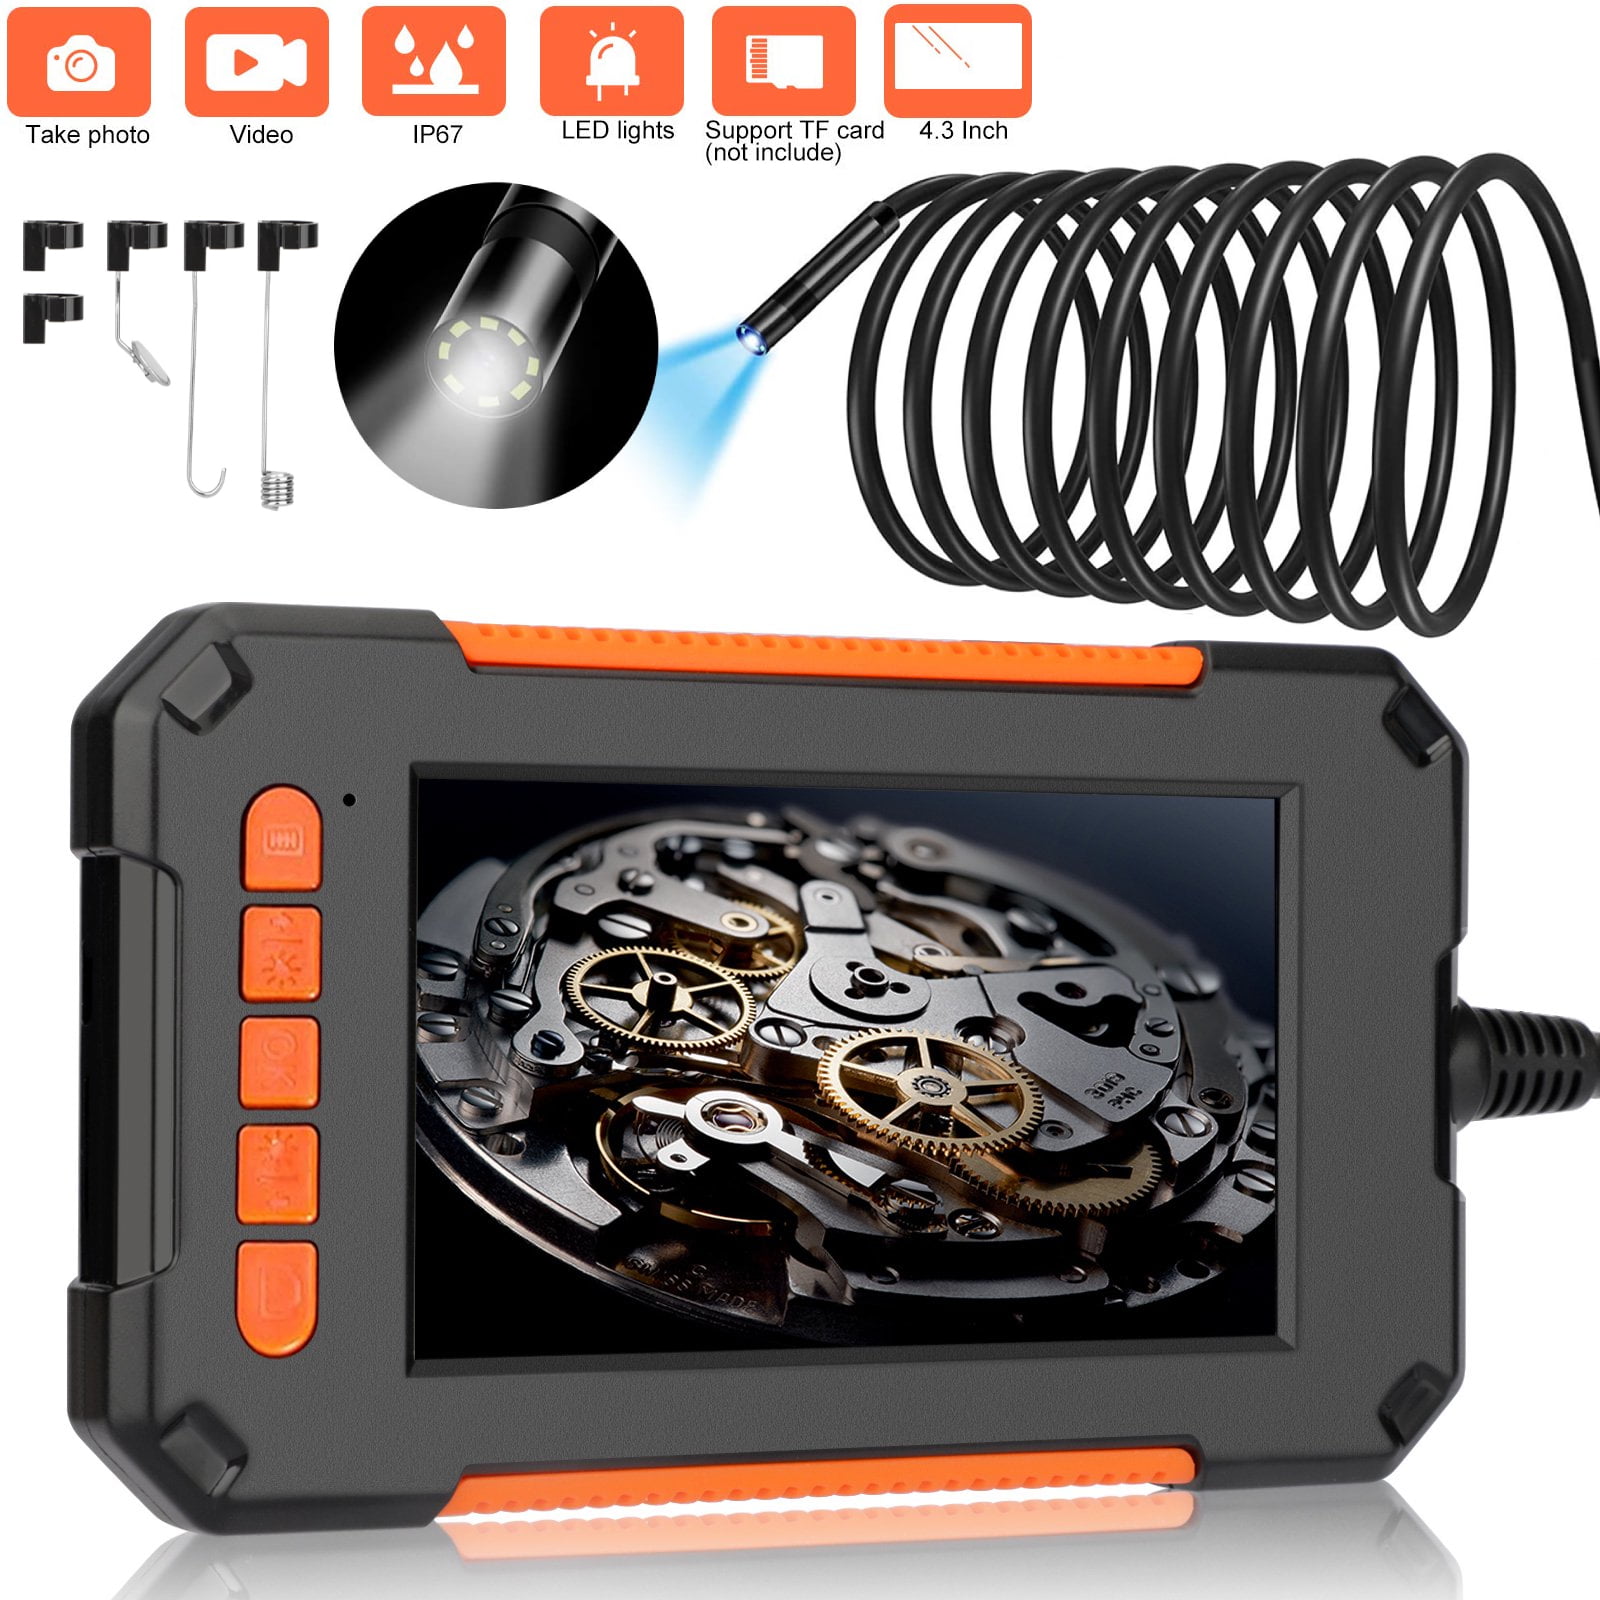 HD 1080P Multifunctional Endoscope Camera with 4.3in Screen Industrial Borescope Inspection Camera with 5m Hardwire Industrial Endoscope 8 LED Lights IP68 Waterproof